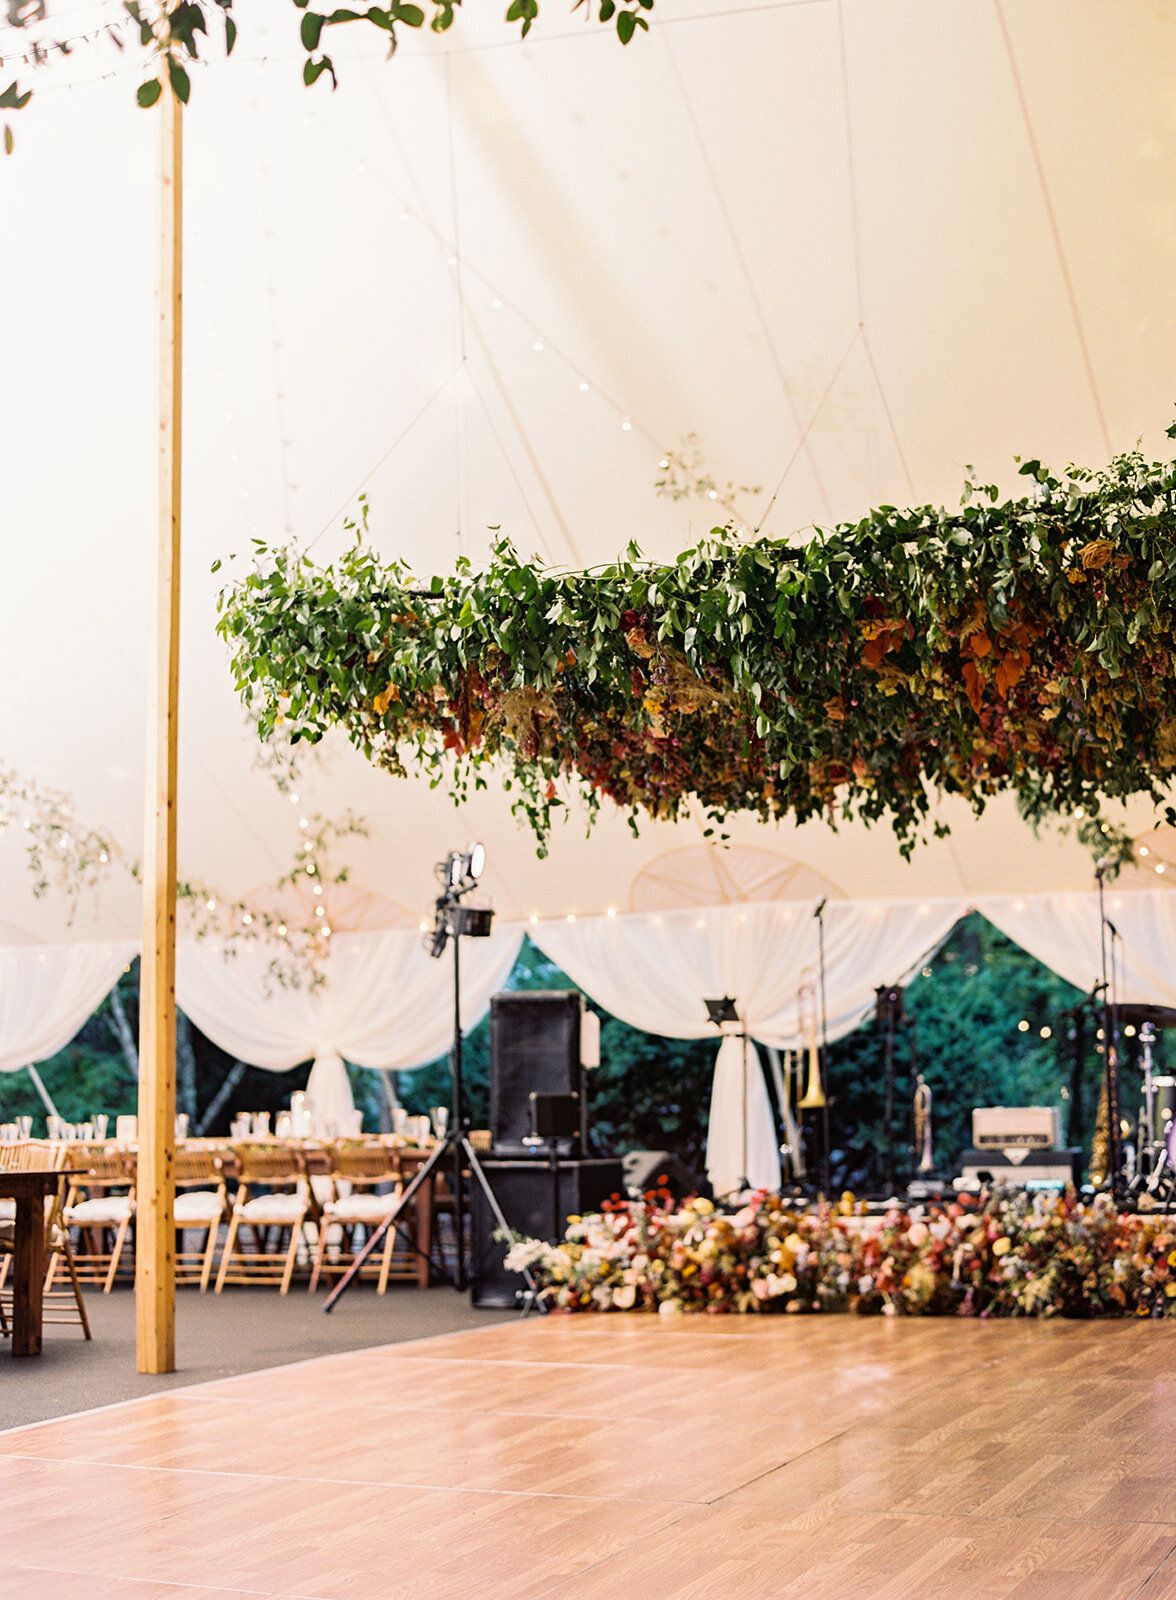 An oversized square hanging flower installation over the dance floor is a great alternative to a floral chandelier! Lush smilax vines, hops, copper beech, and bright wildflowers. RT Lodge and Nashville wedding floral designer.